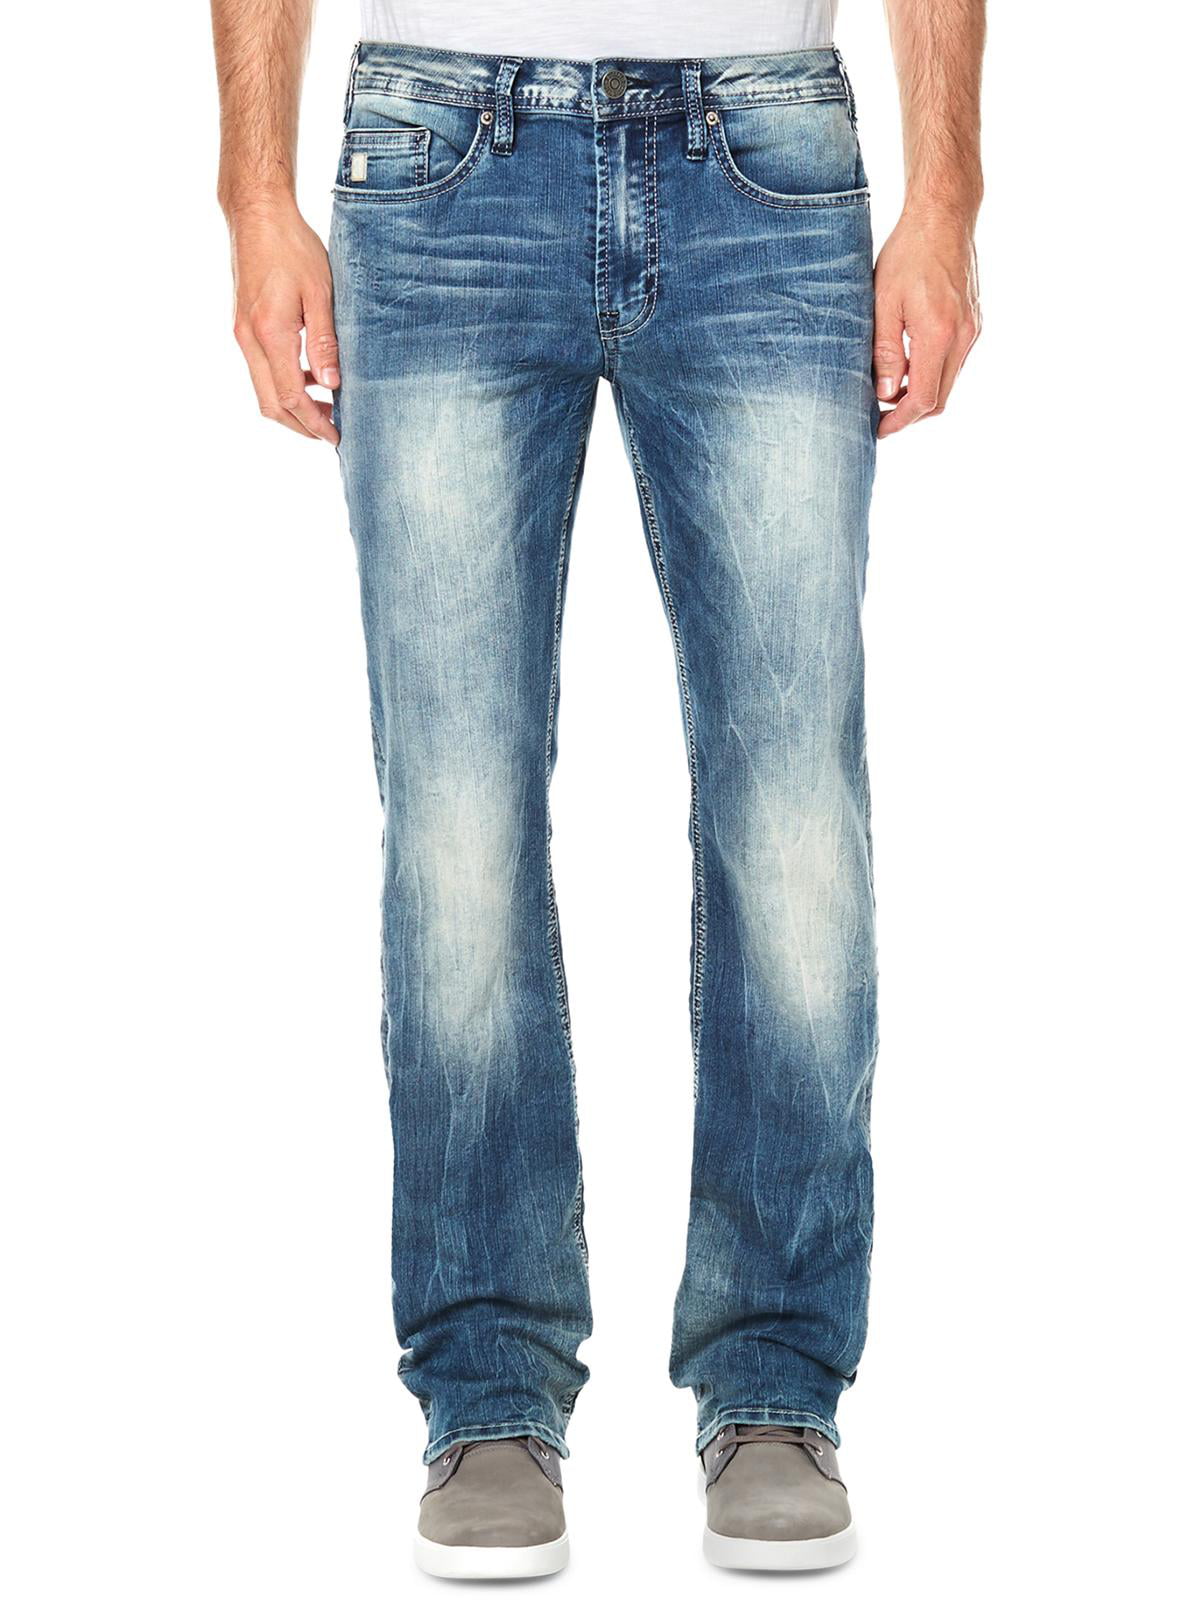 Buffalo David Bitton Mens Driven Relaxed Straight Vintage and Worn Denim